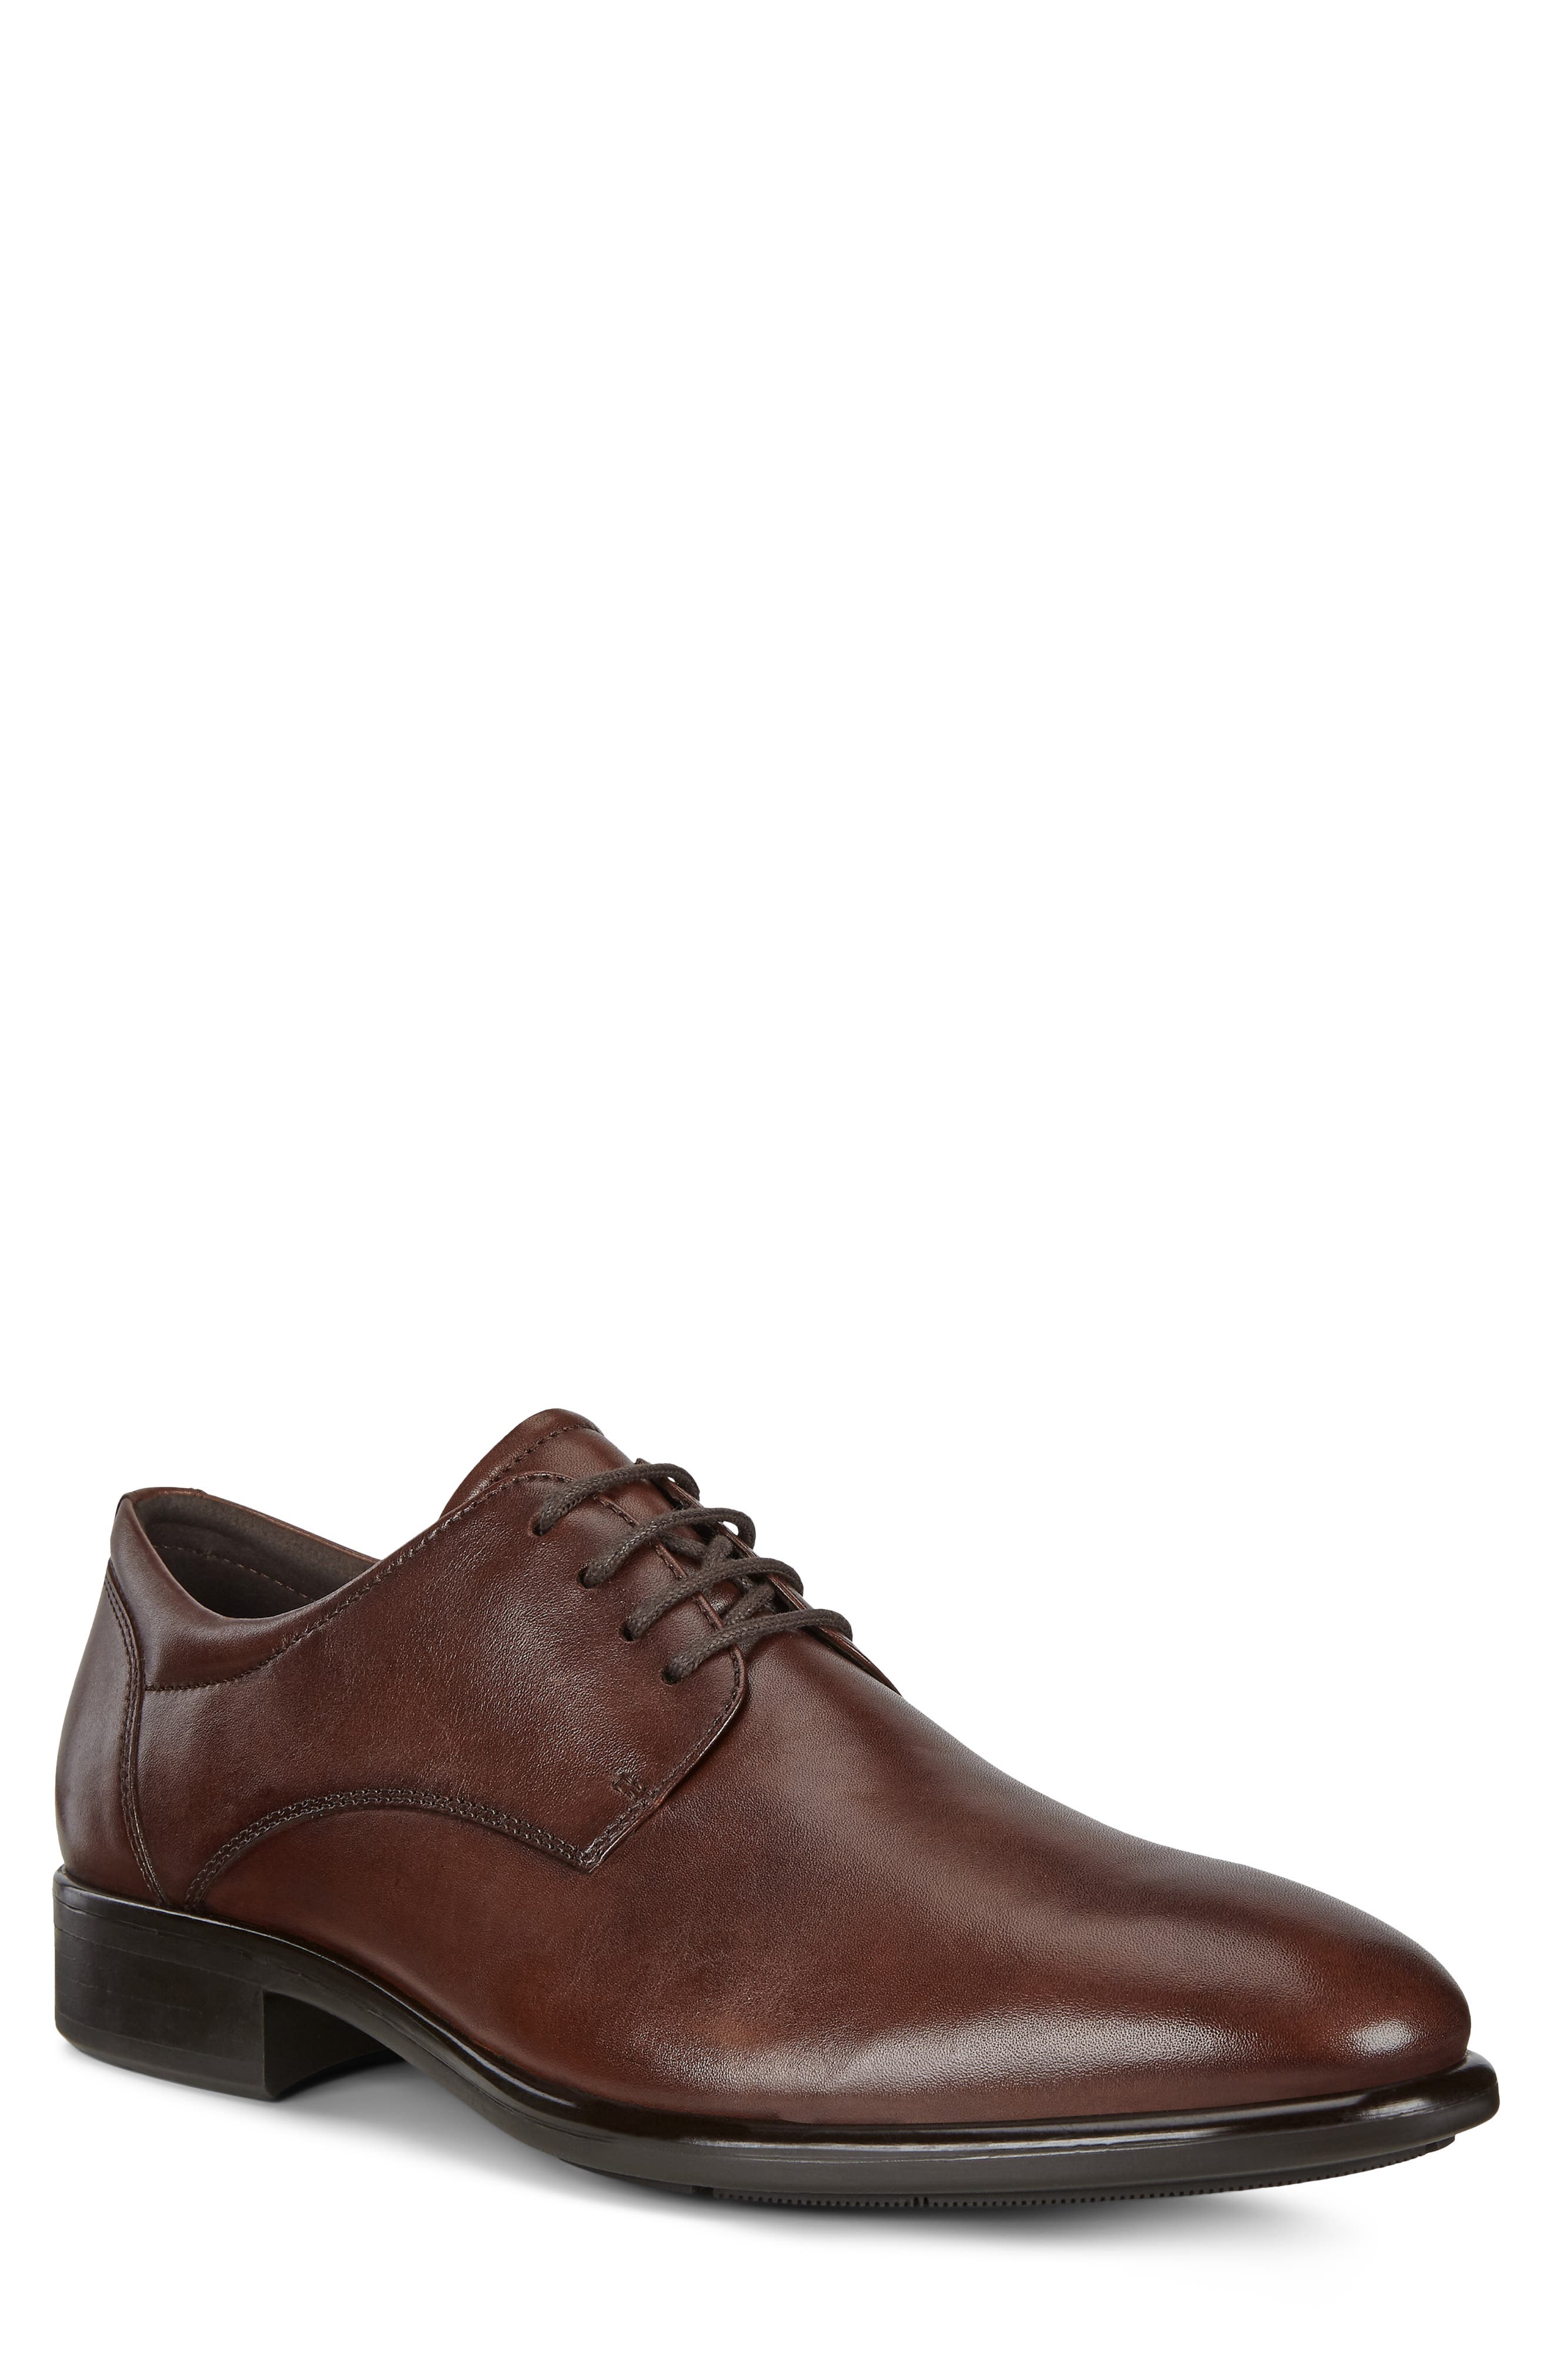 derby formal shoes